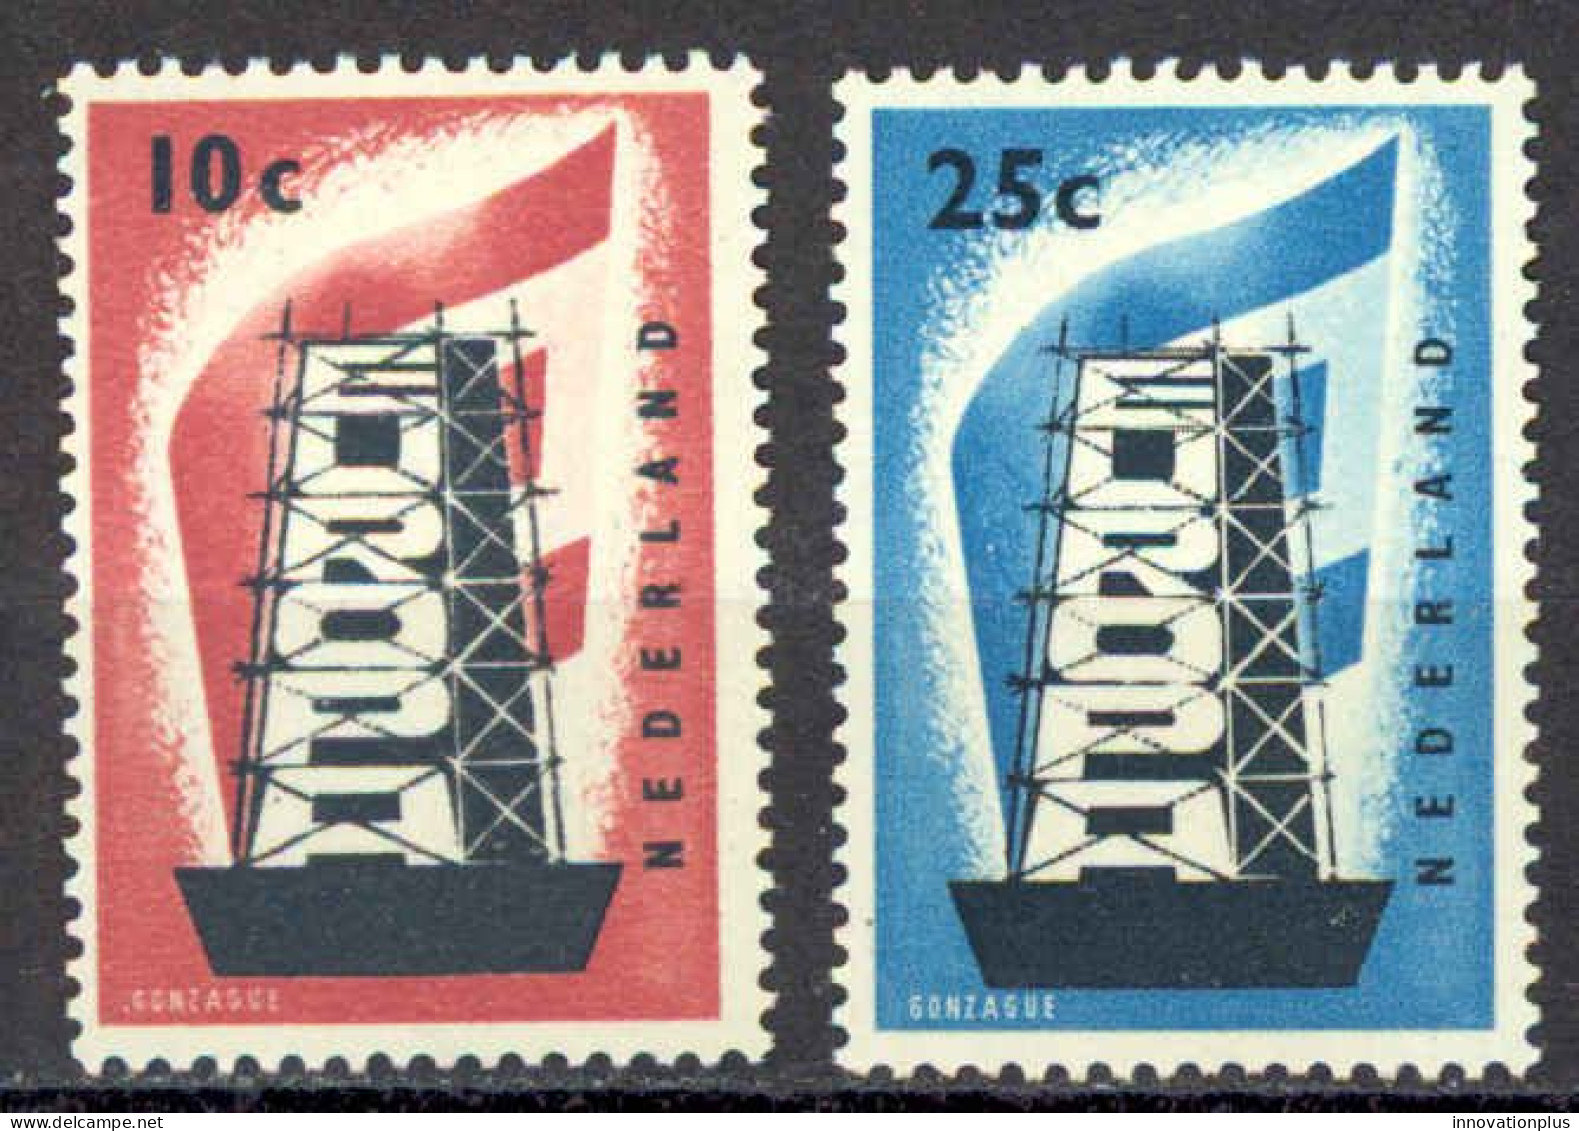 Netherlands Sc# 368-369 MNH 1956 Europa - Unused Stamps